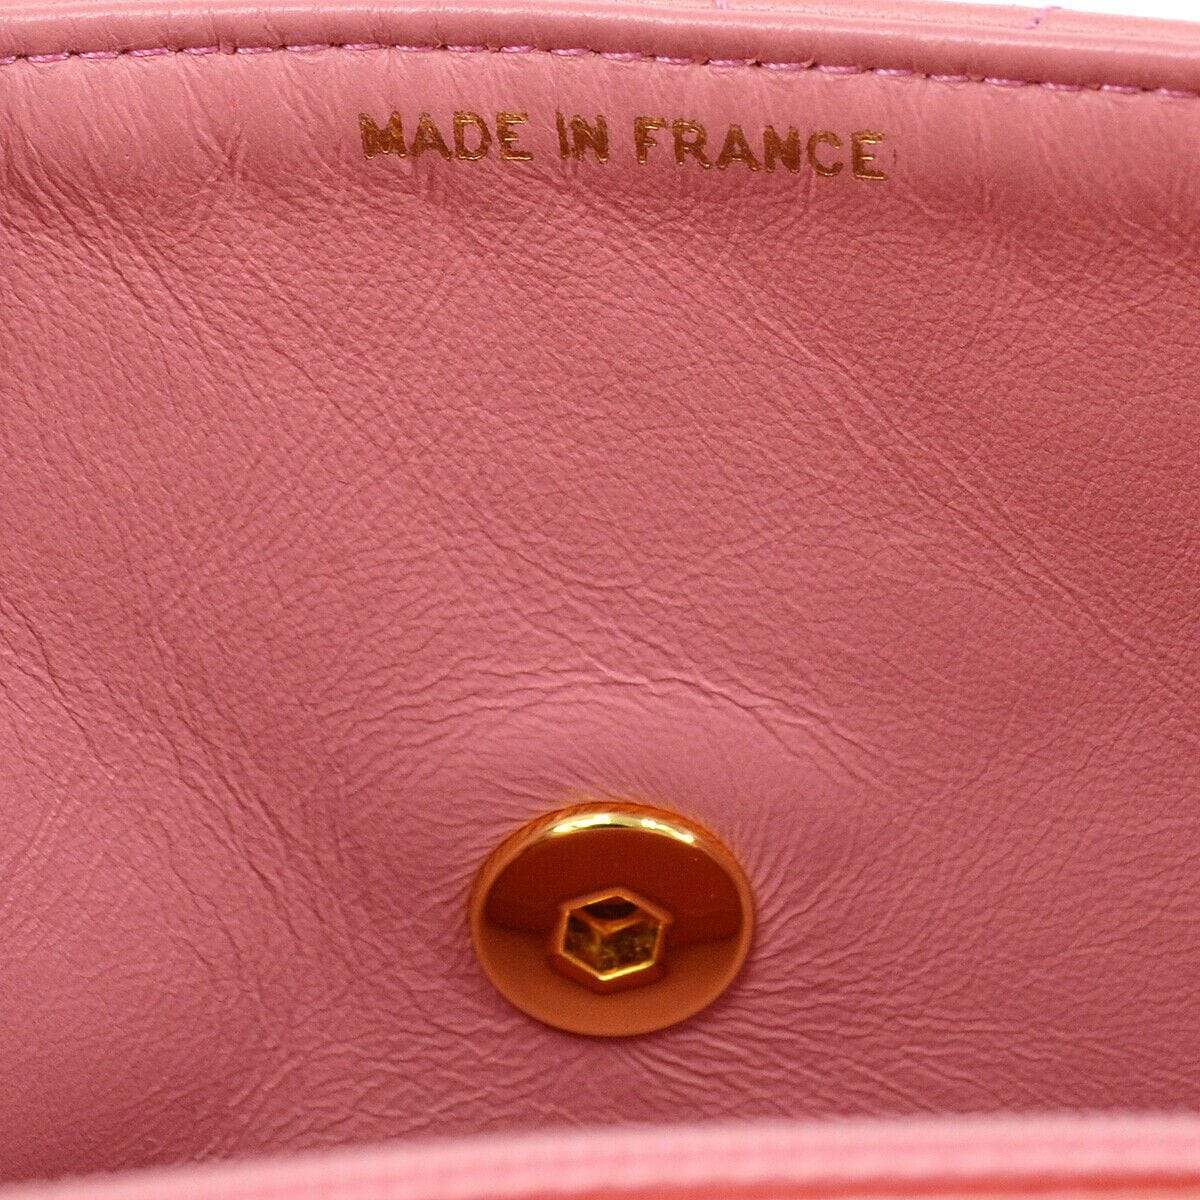 Chanel Chanel Quilted CC Single Chain Mini Shoulder Bag - ASL1849